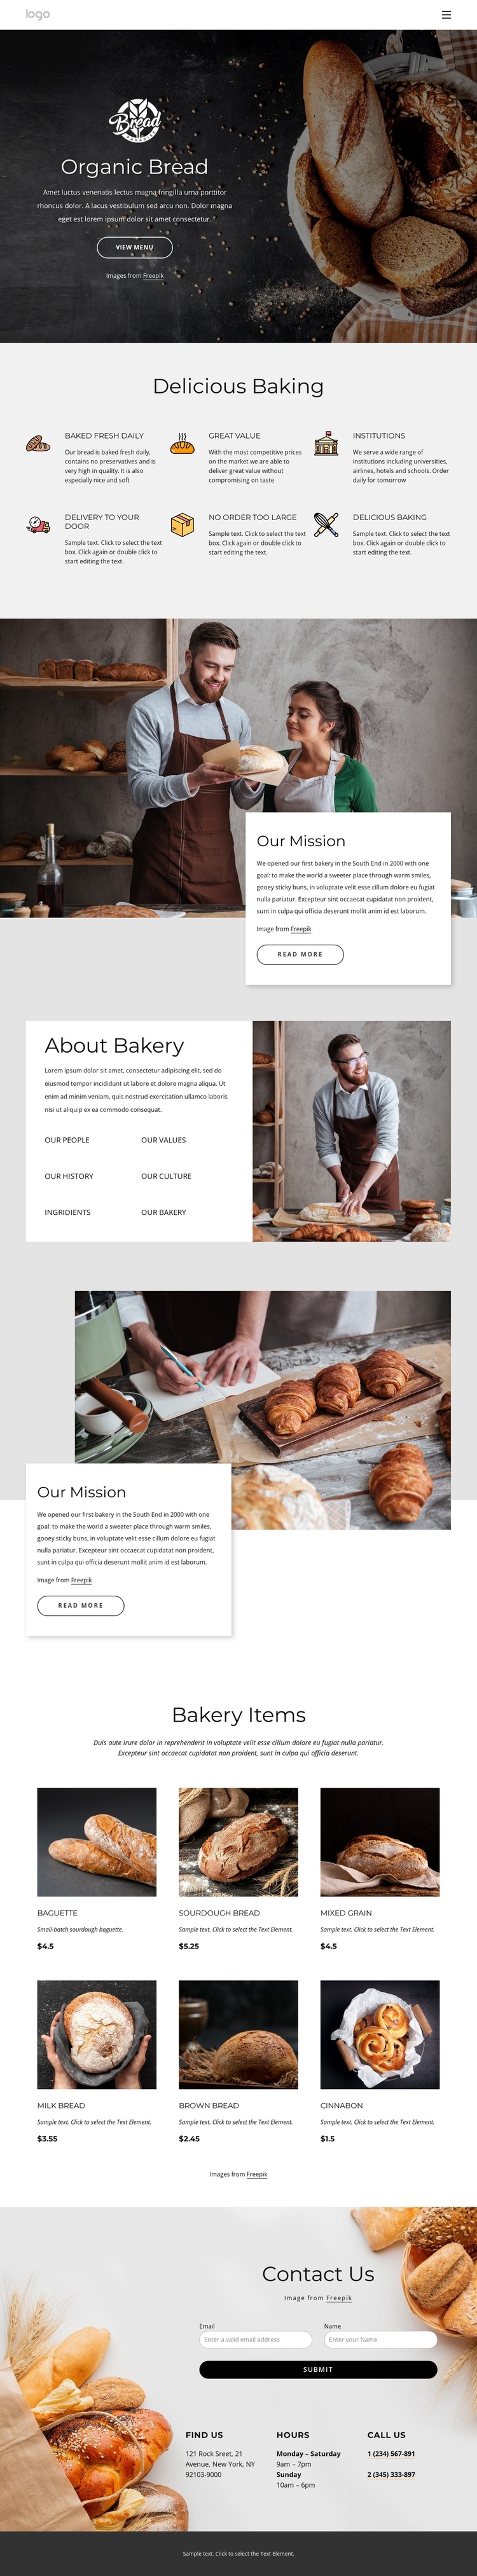 Bagels, buns, rolls, biscuits and loaf breads Joomla Template